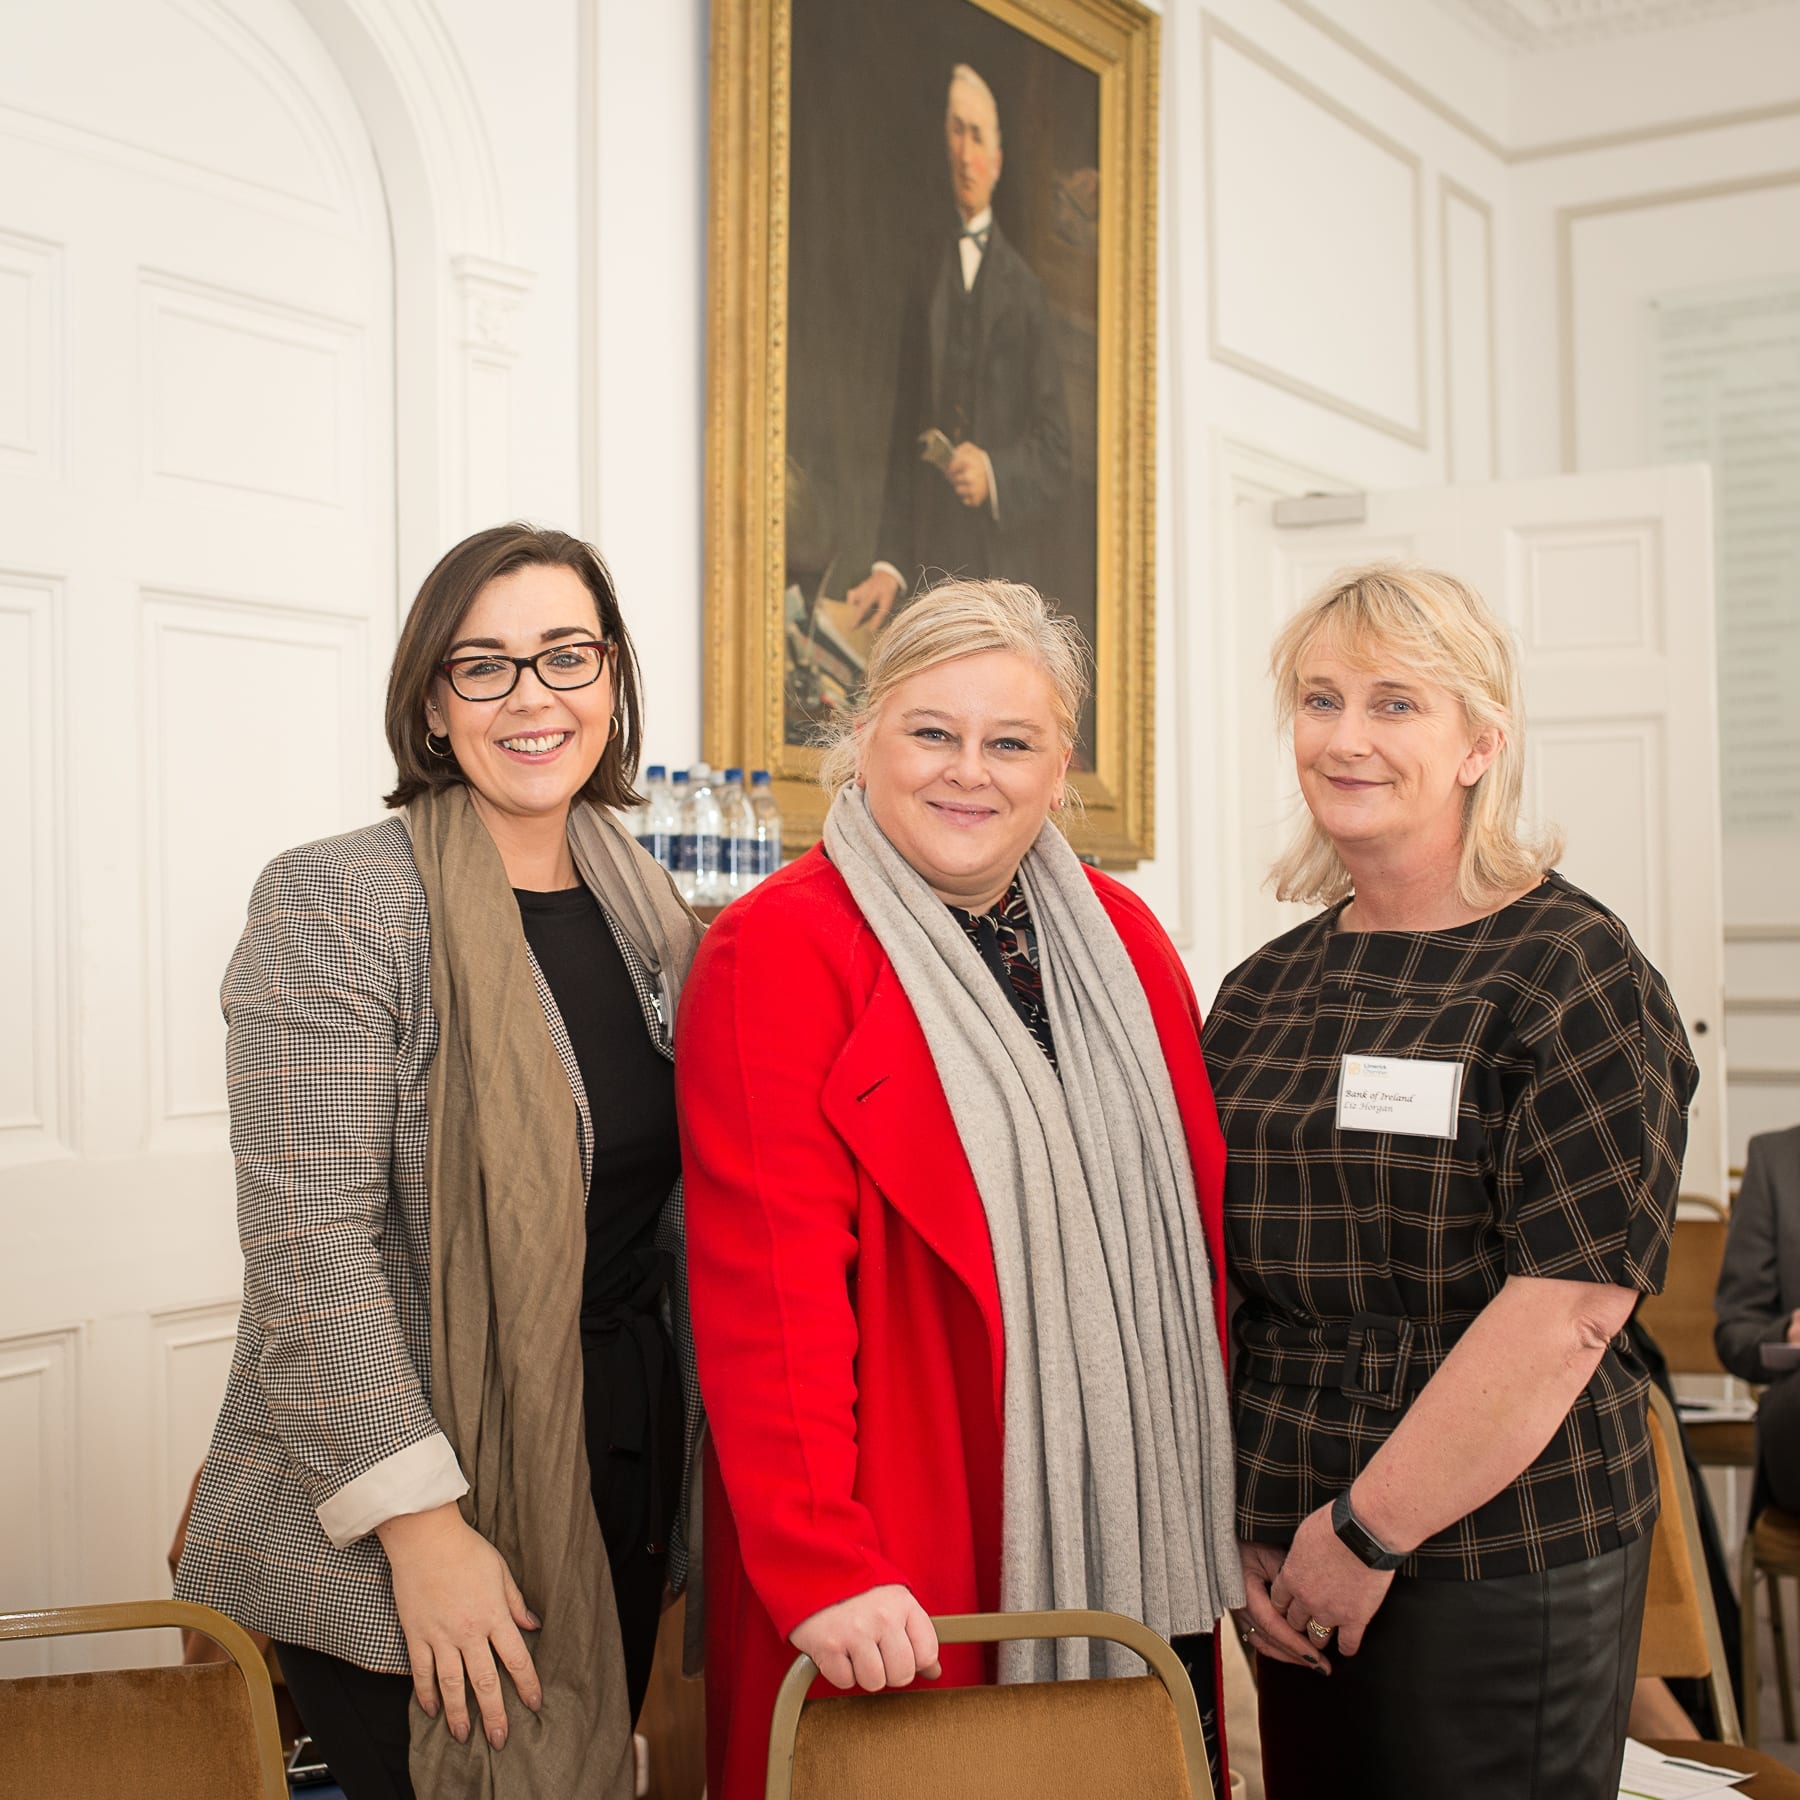 At the Limerick Chamber Skillnet Working Lunchtime Networking with Donal Fitzgibbon was From left to right: Ciara Earlie - BOI, Orla Stumble - Irish Greyhound Board, Liz Horgan - BOI 
Image by Morning Star Photography